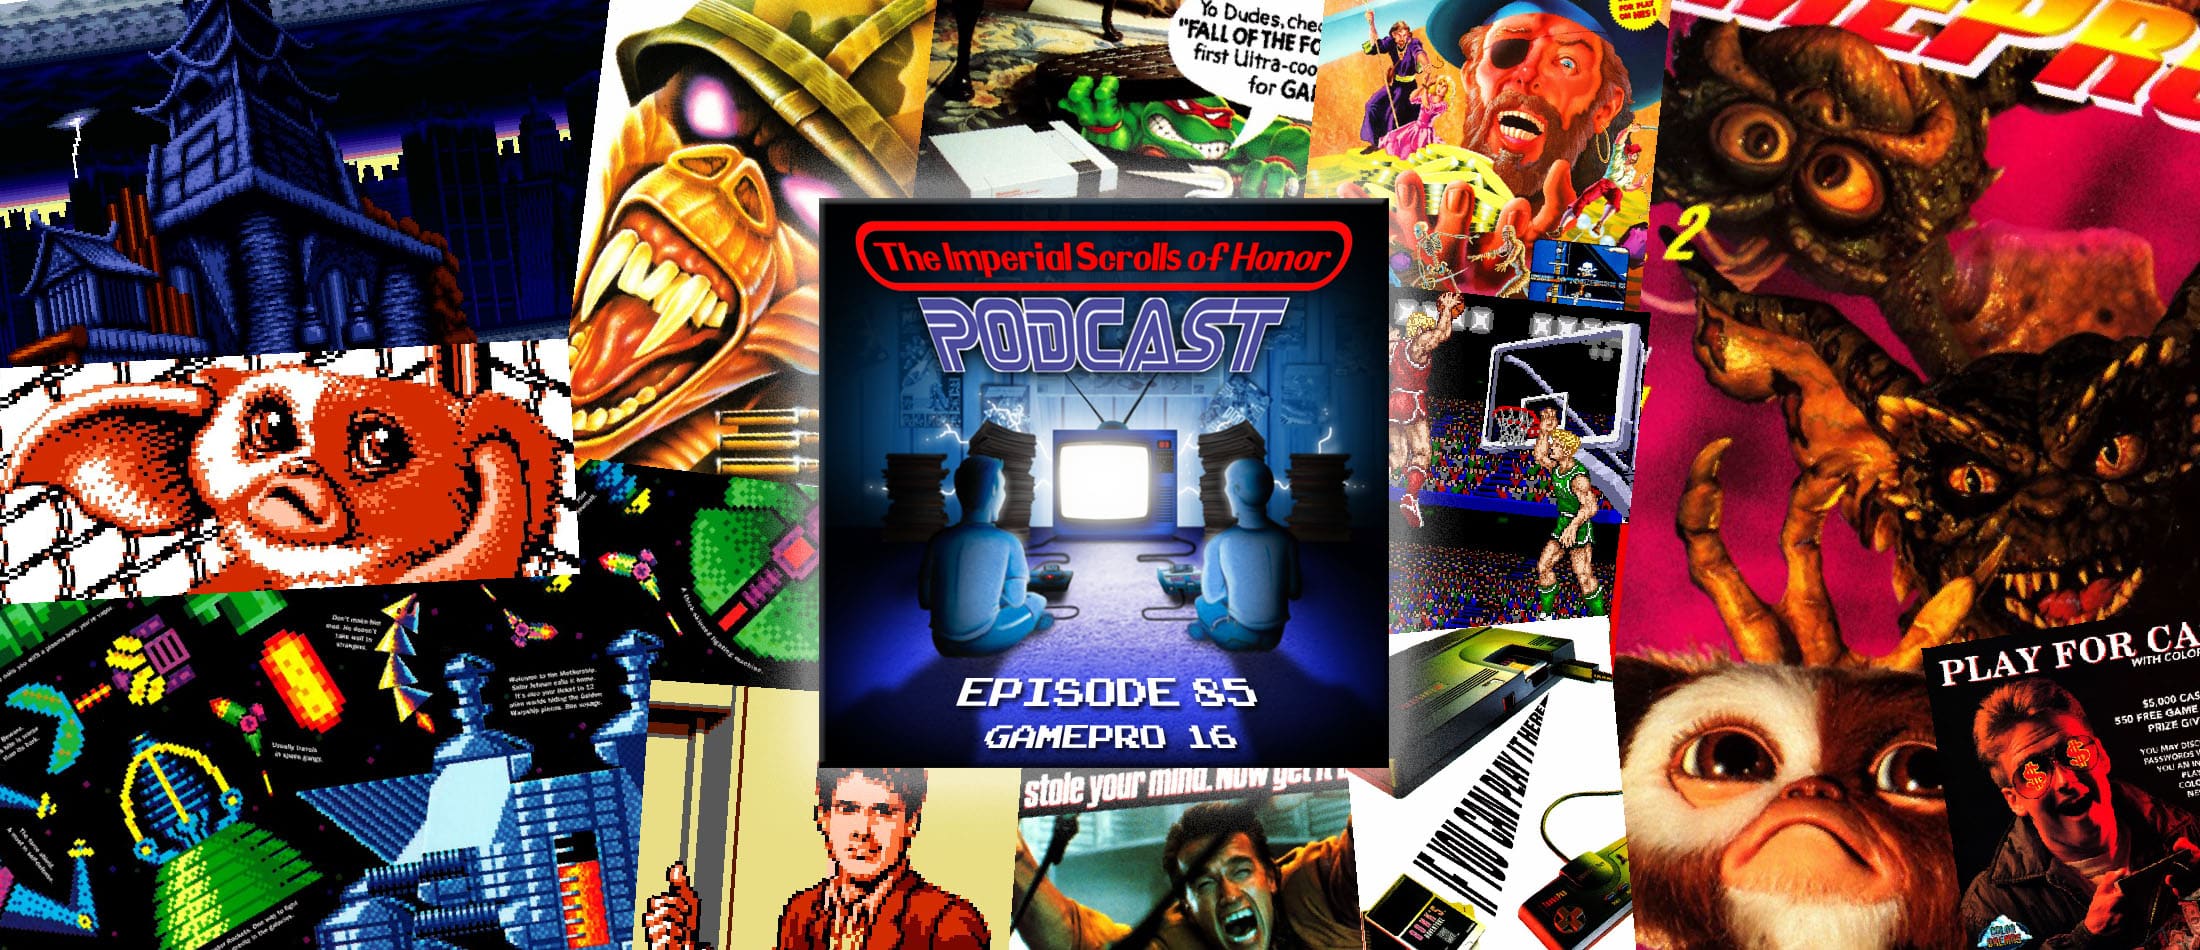 The Imperial Scrolls of Honor Podcast - Ep 85 - GamePro #16